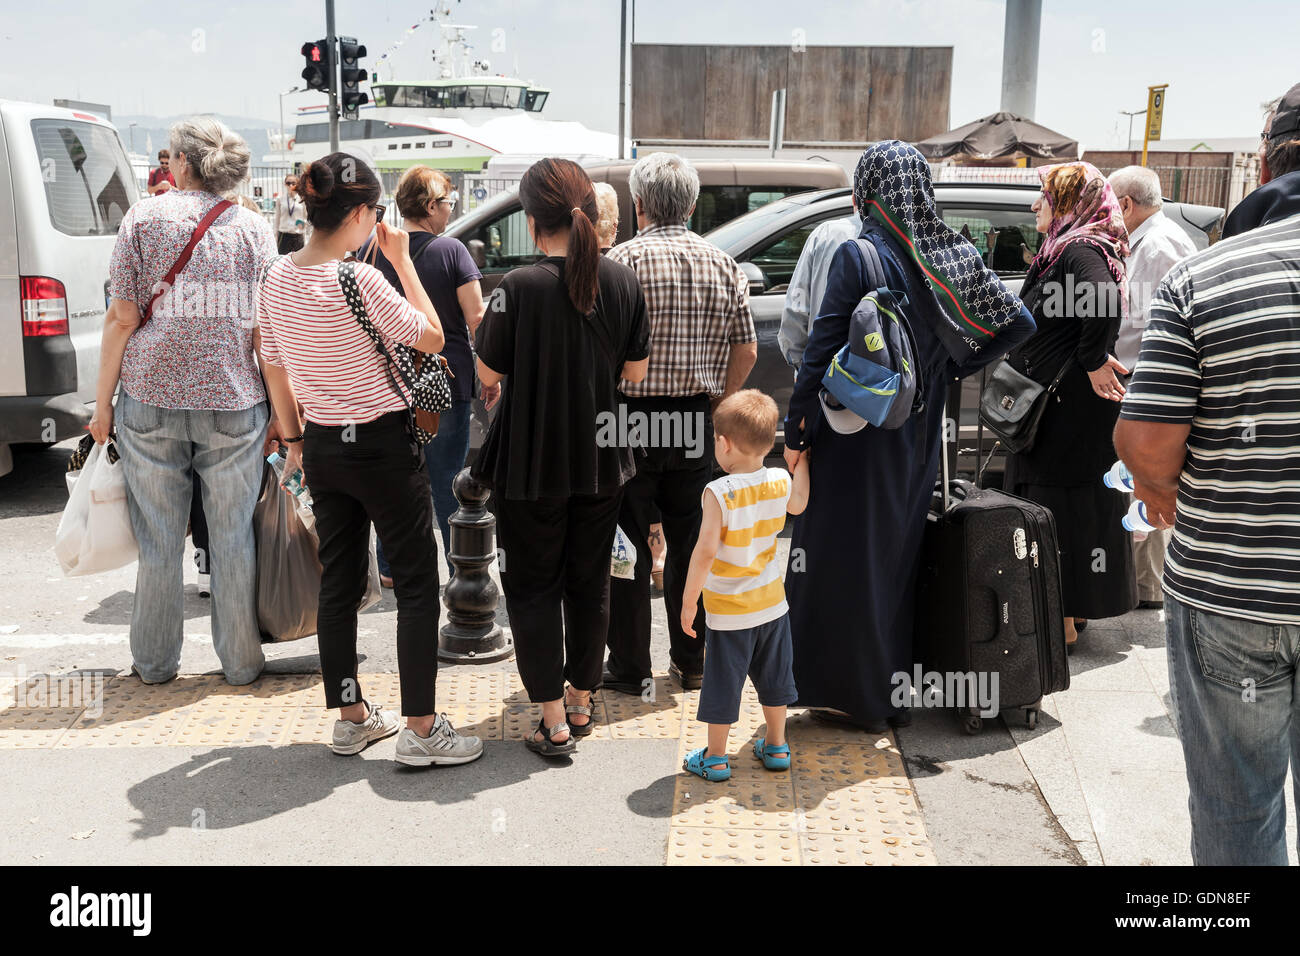 Istanbul, Turkey - July 1, 2016: Ordinary people waiting for green light on the pedestrian crossing in Istanbul Stock Photo